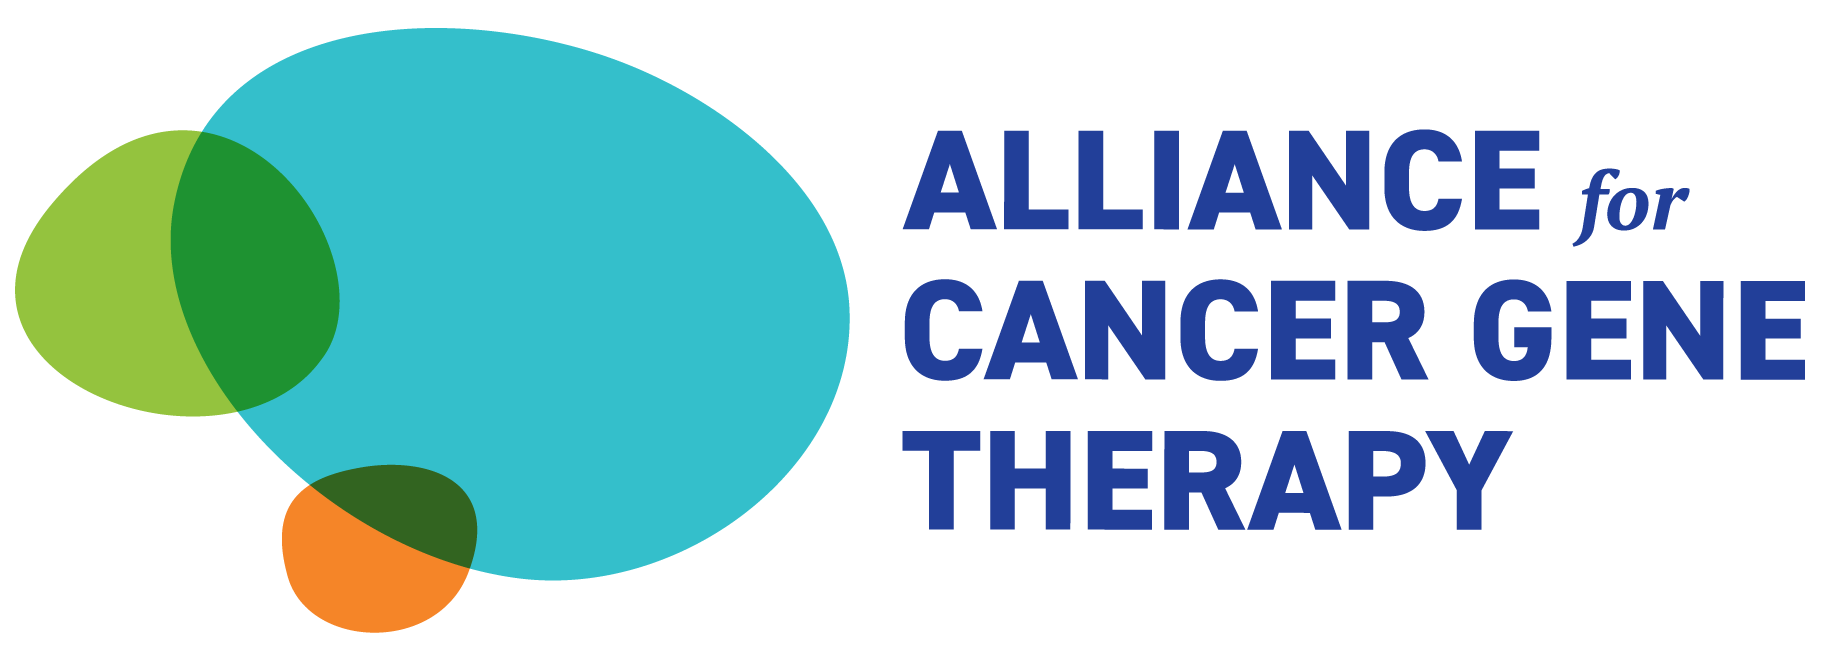 Alliance for Cancer Gene Therapy logo